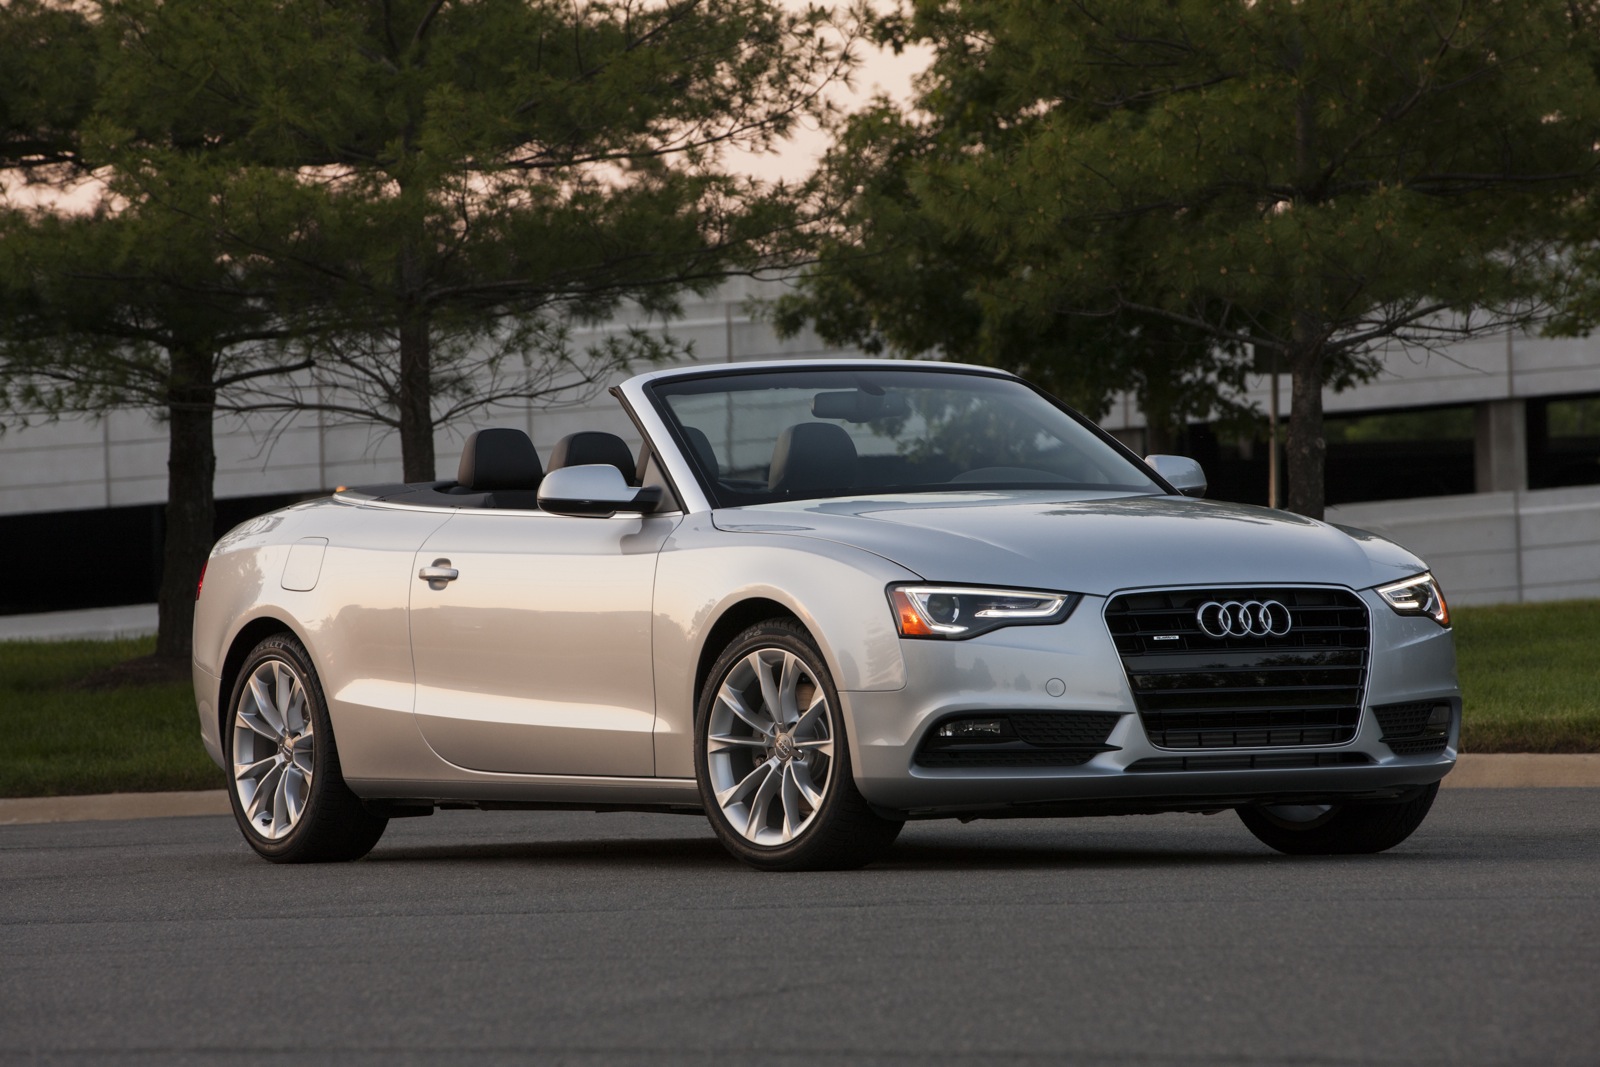 2013 Audi A5 Review, Ratings, Specs, Prices, and Photos